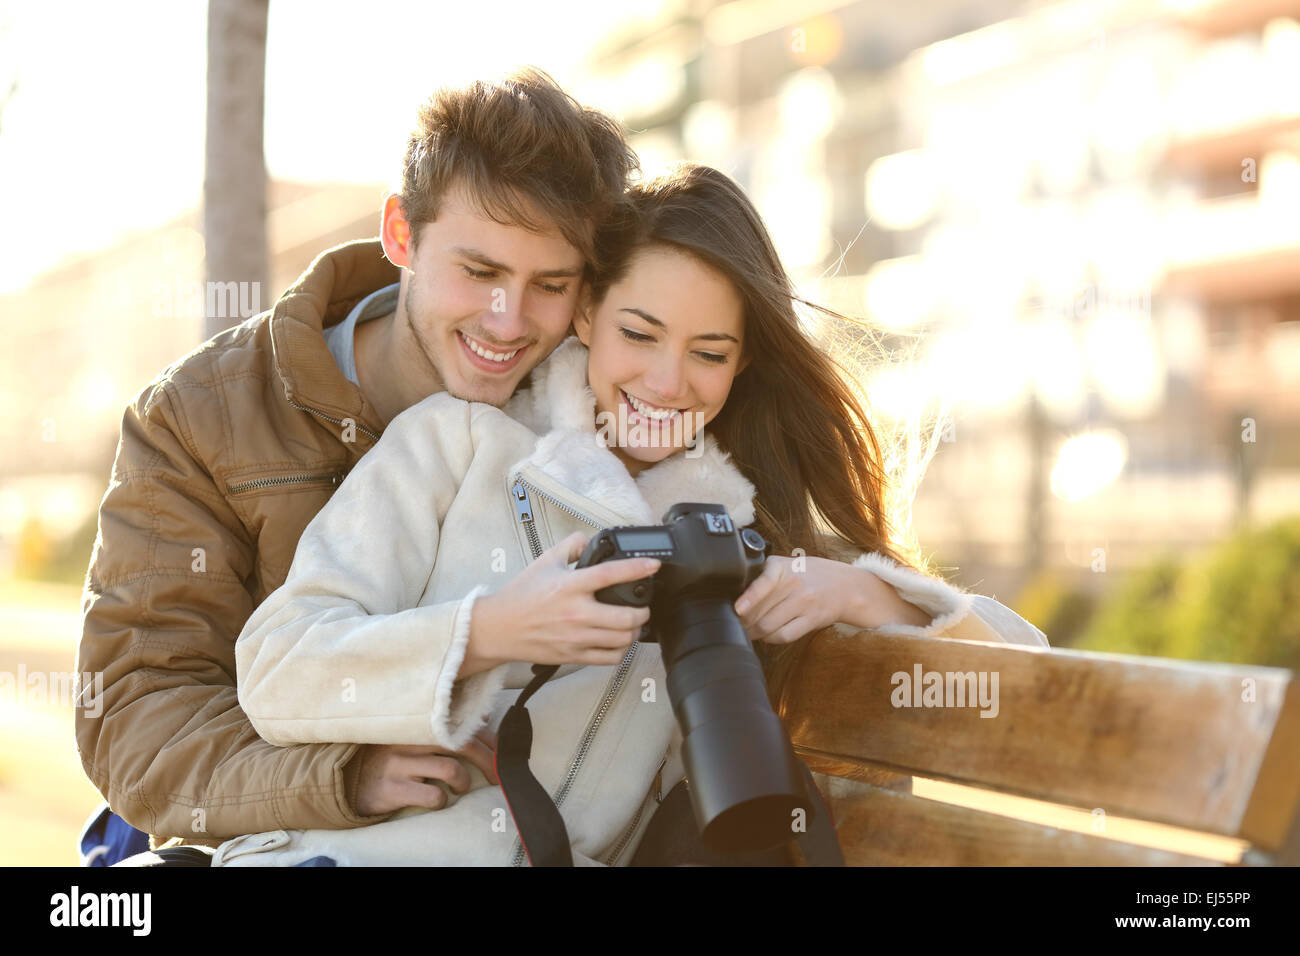 Couple of tourists reviewing photos in a dslr camera sitting in a bench of a park with an urban background Stock Photo